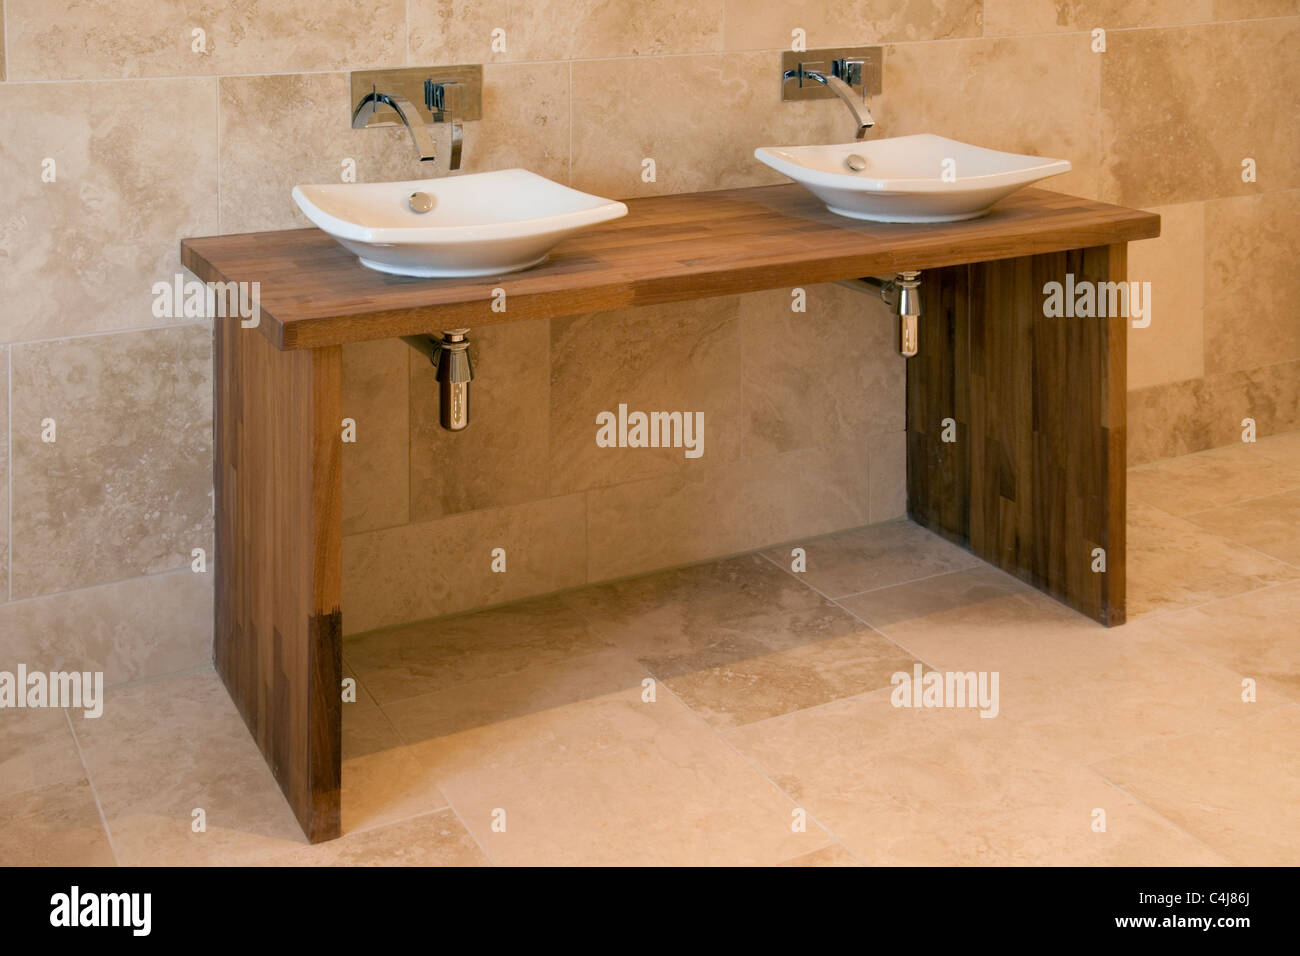 Contemporary his and hers wash basins. Stock Photo